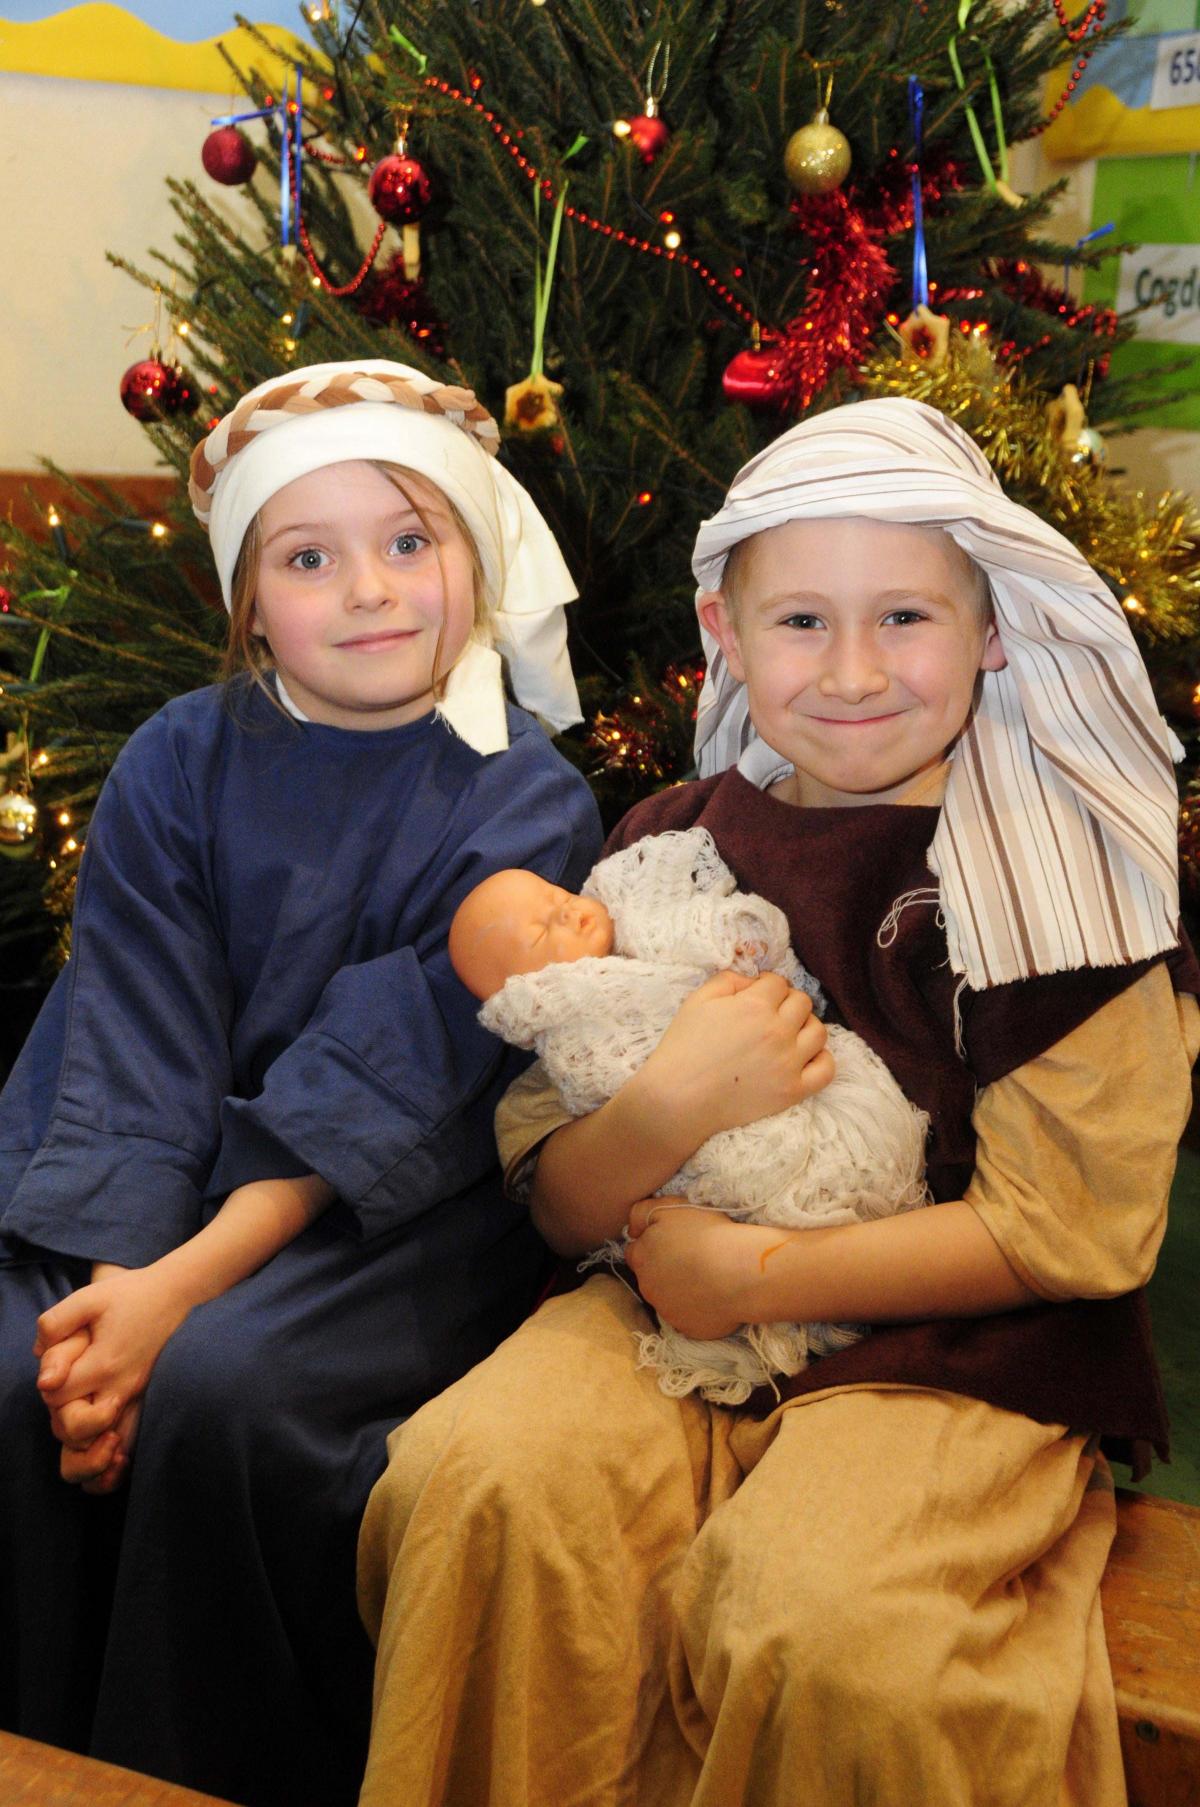 Year 1 and 2 at St Mary's Primary School, Bridport - Nativity Plays in the Bridport area 2013